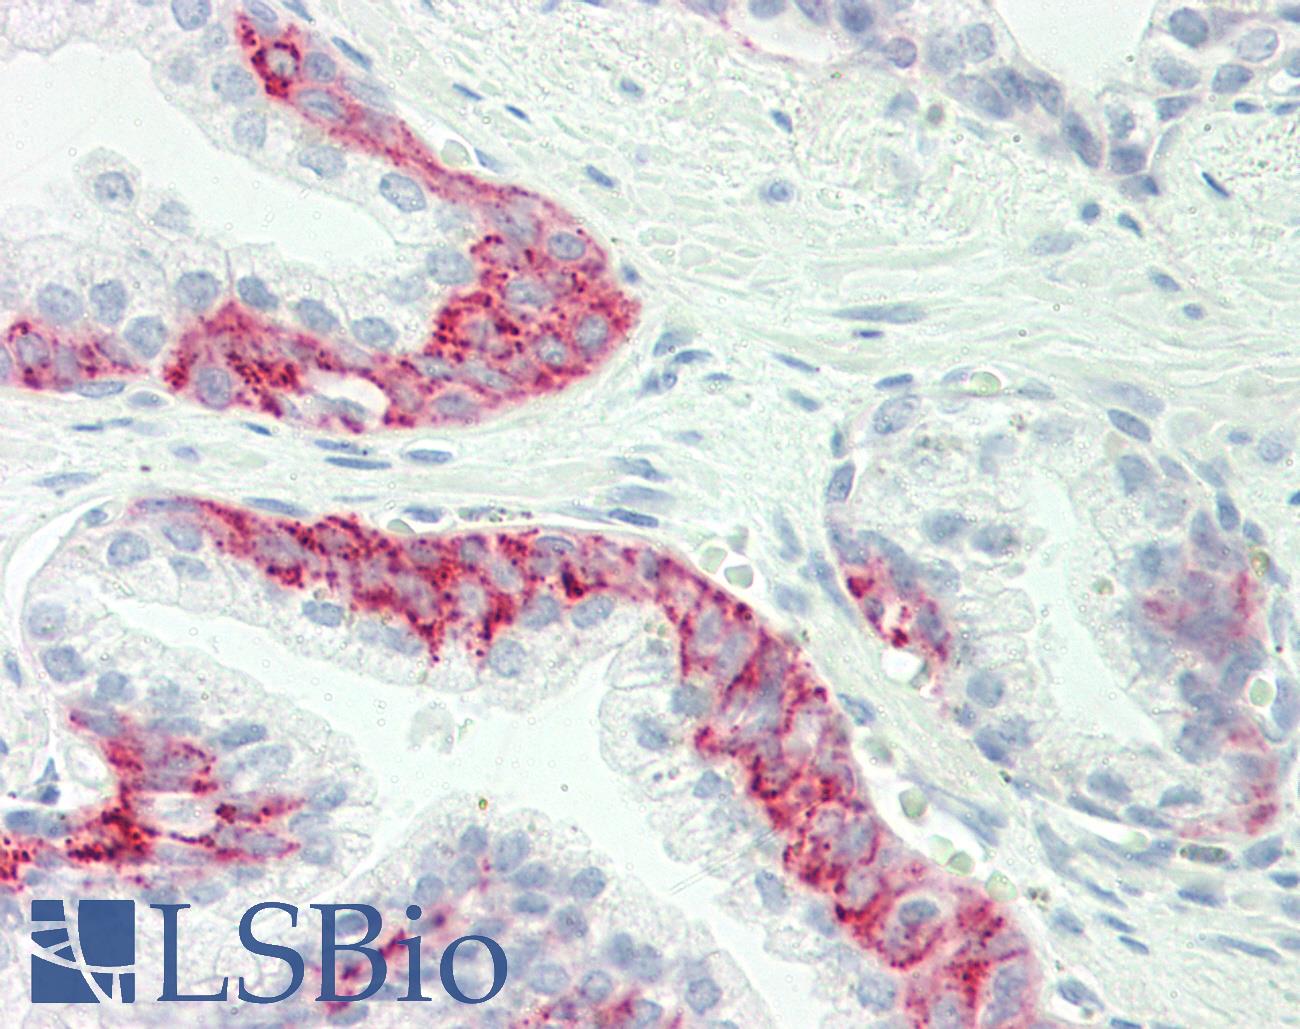 GJC1 / CX45 / Connexin 45 Antibody - Anti-GJC1 / CX45 / Connexin 45 antibody IHC staining of human prostate. Immunohistochemistry of formalin-fixed, paraffin-embedded tissue after heat-induced antigen retrieval. Antibody dilution 1:100.